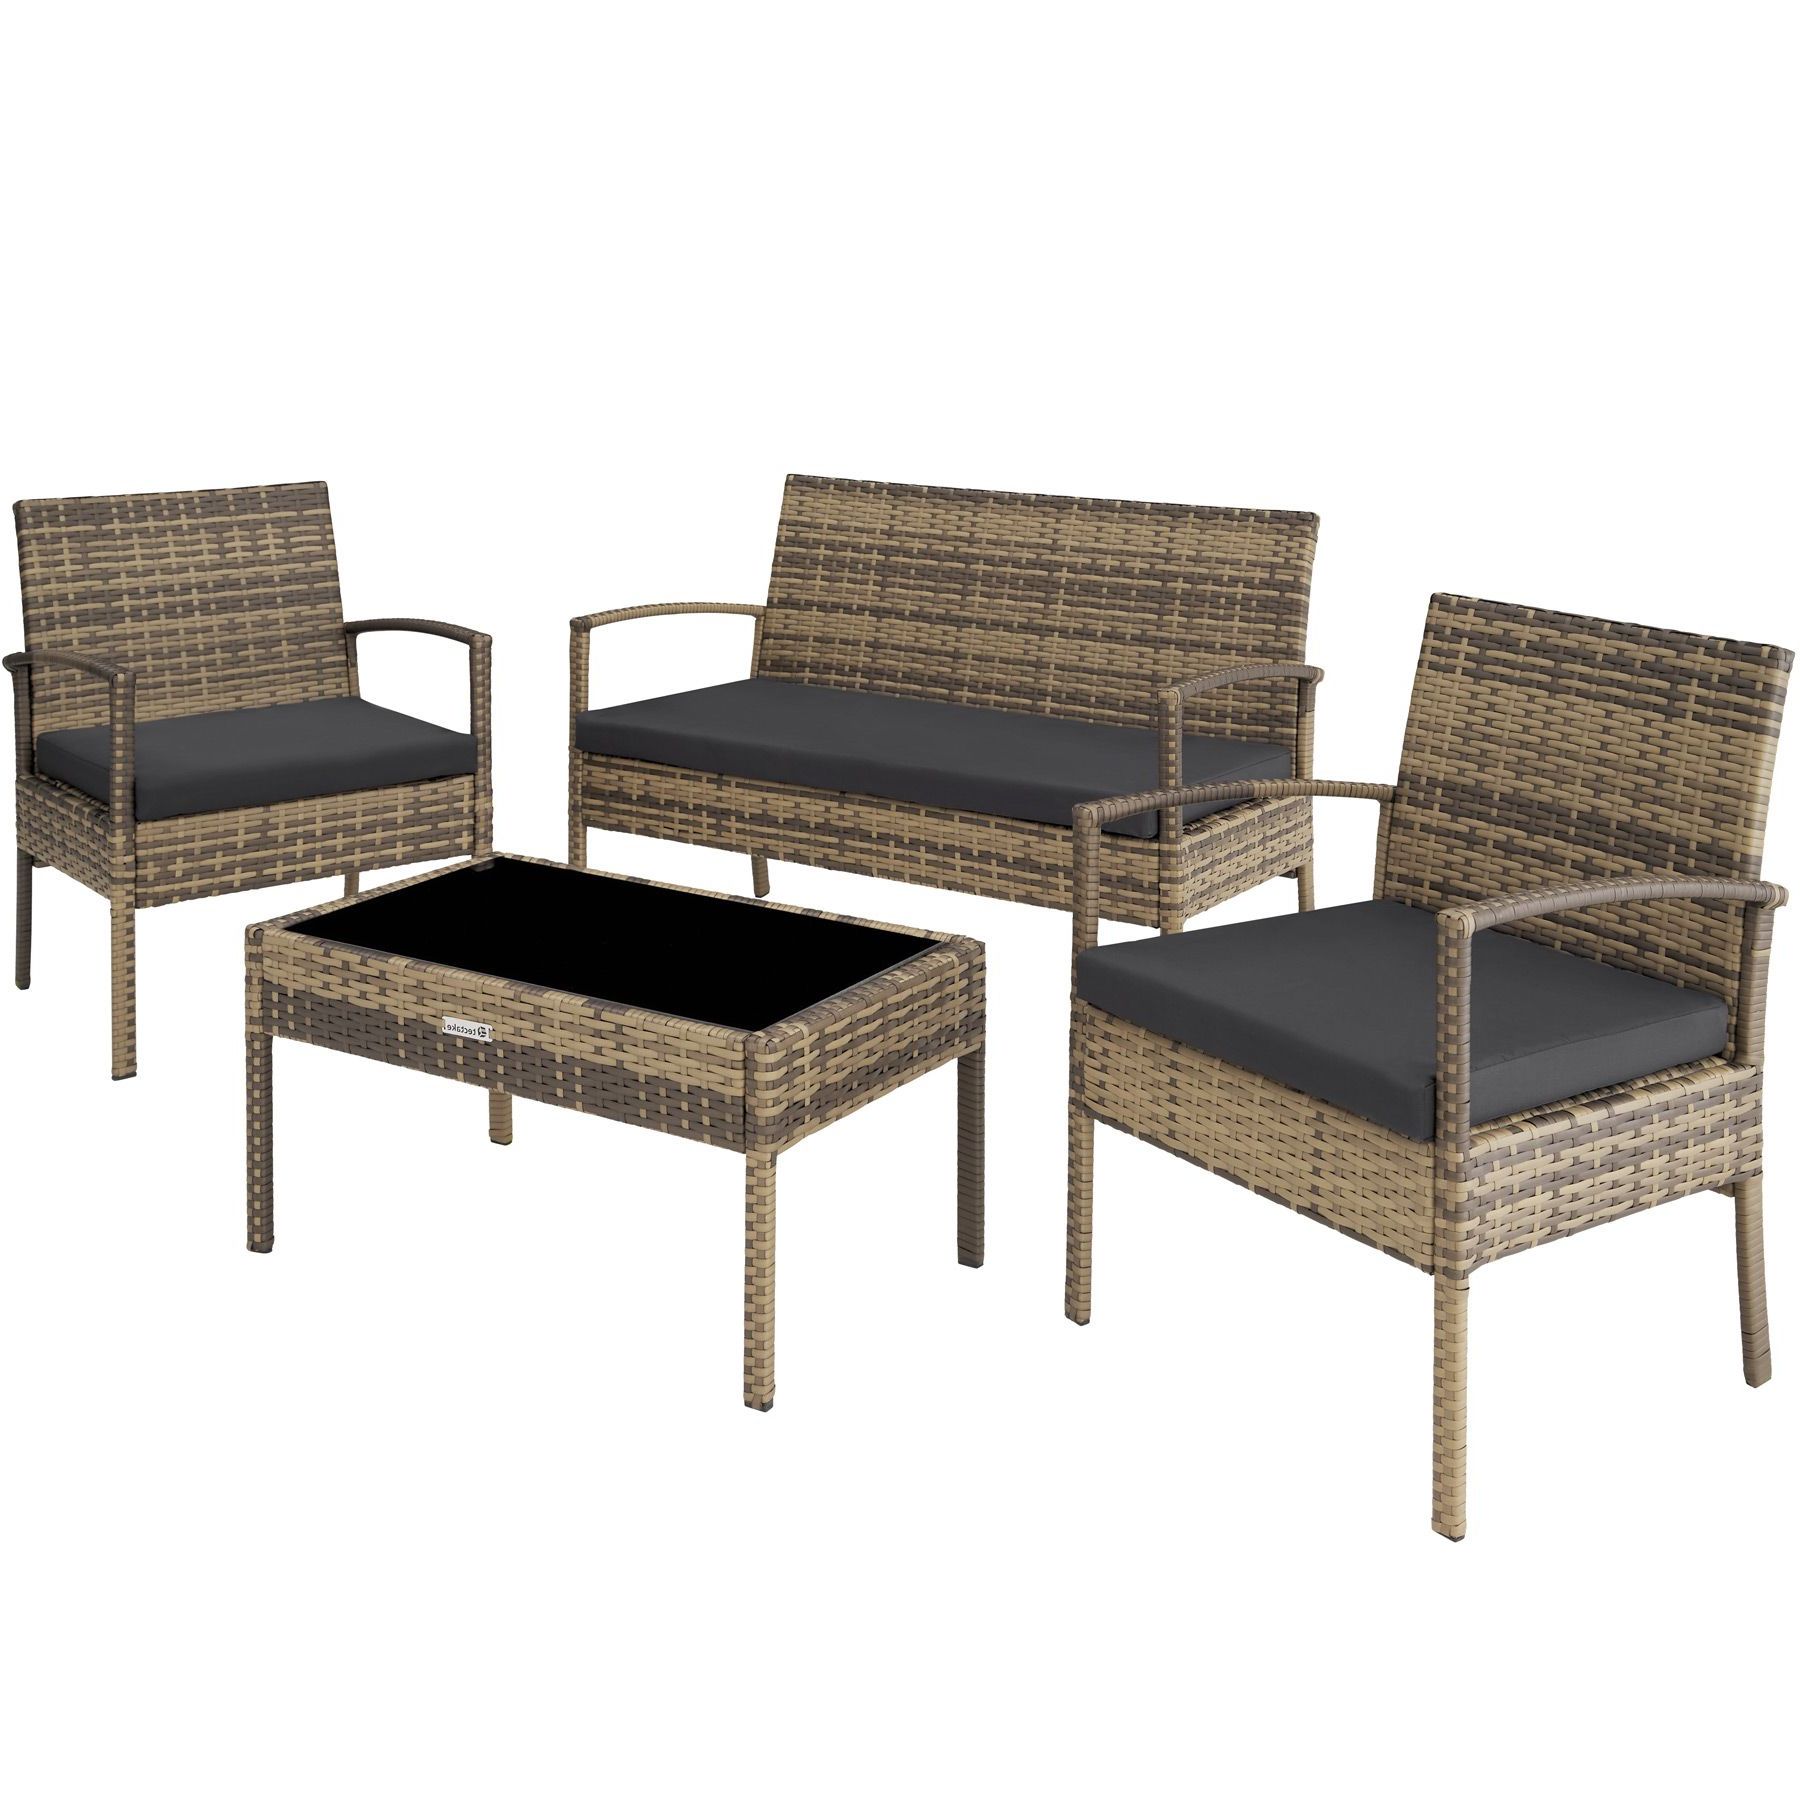 Poly Rattan Garden Furniture 2 Chairs Bench Table Set Outdoor Patio Regarding Well Known Natural Woven Modern Outdoor Chairs Sets (View 8 of 15)